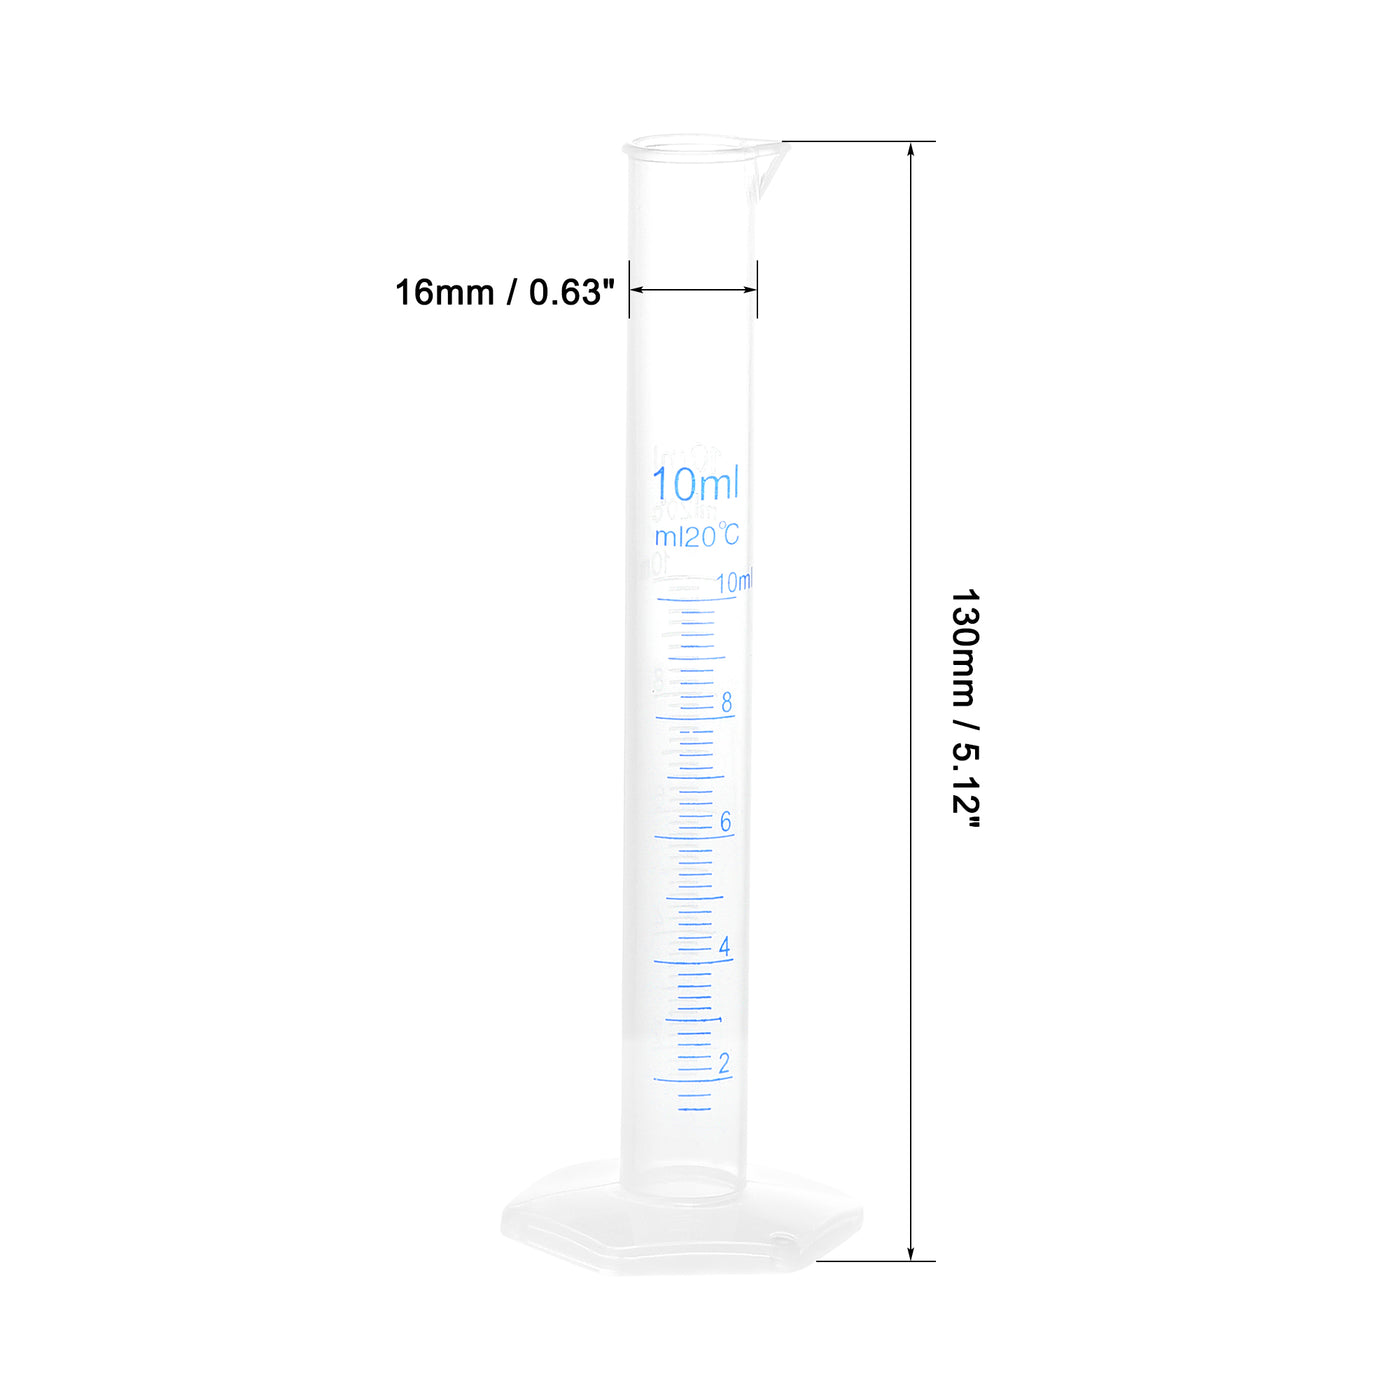 uxcell Uxcell Plastic Graduated Cylinder 10ml Measuring Cylinder, 2-Sided Metric Marking 12Pcs